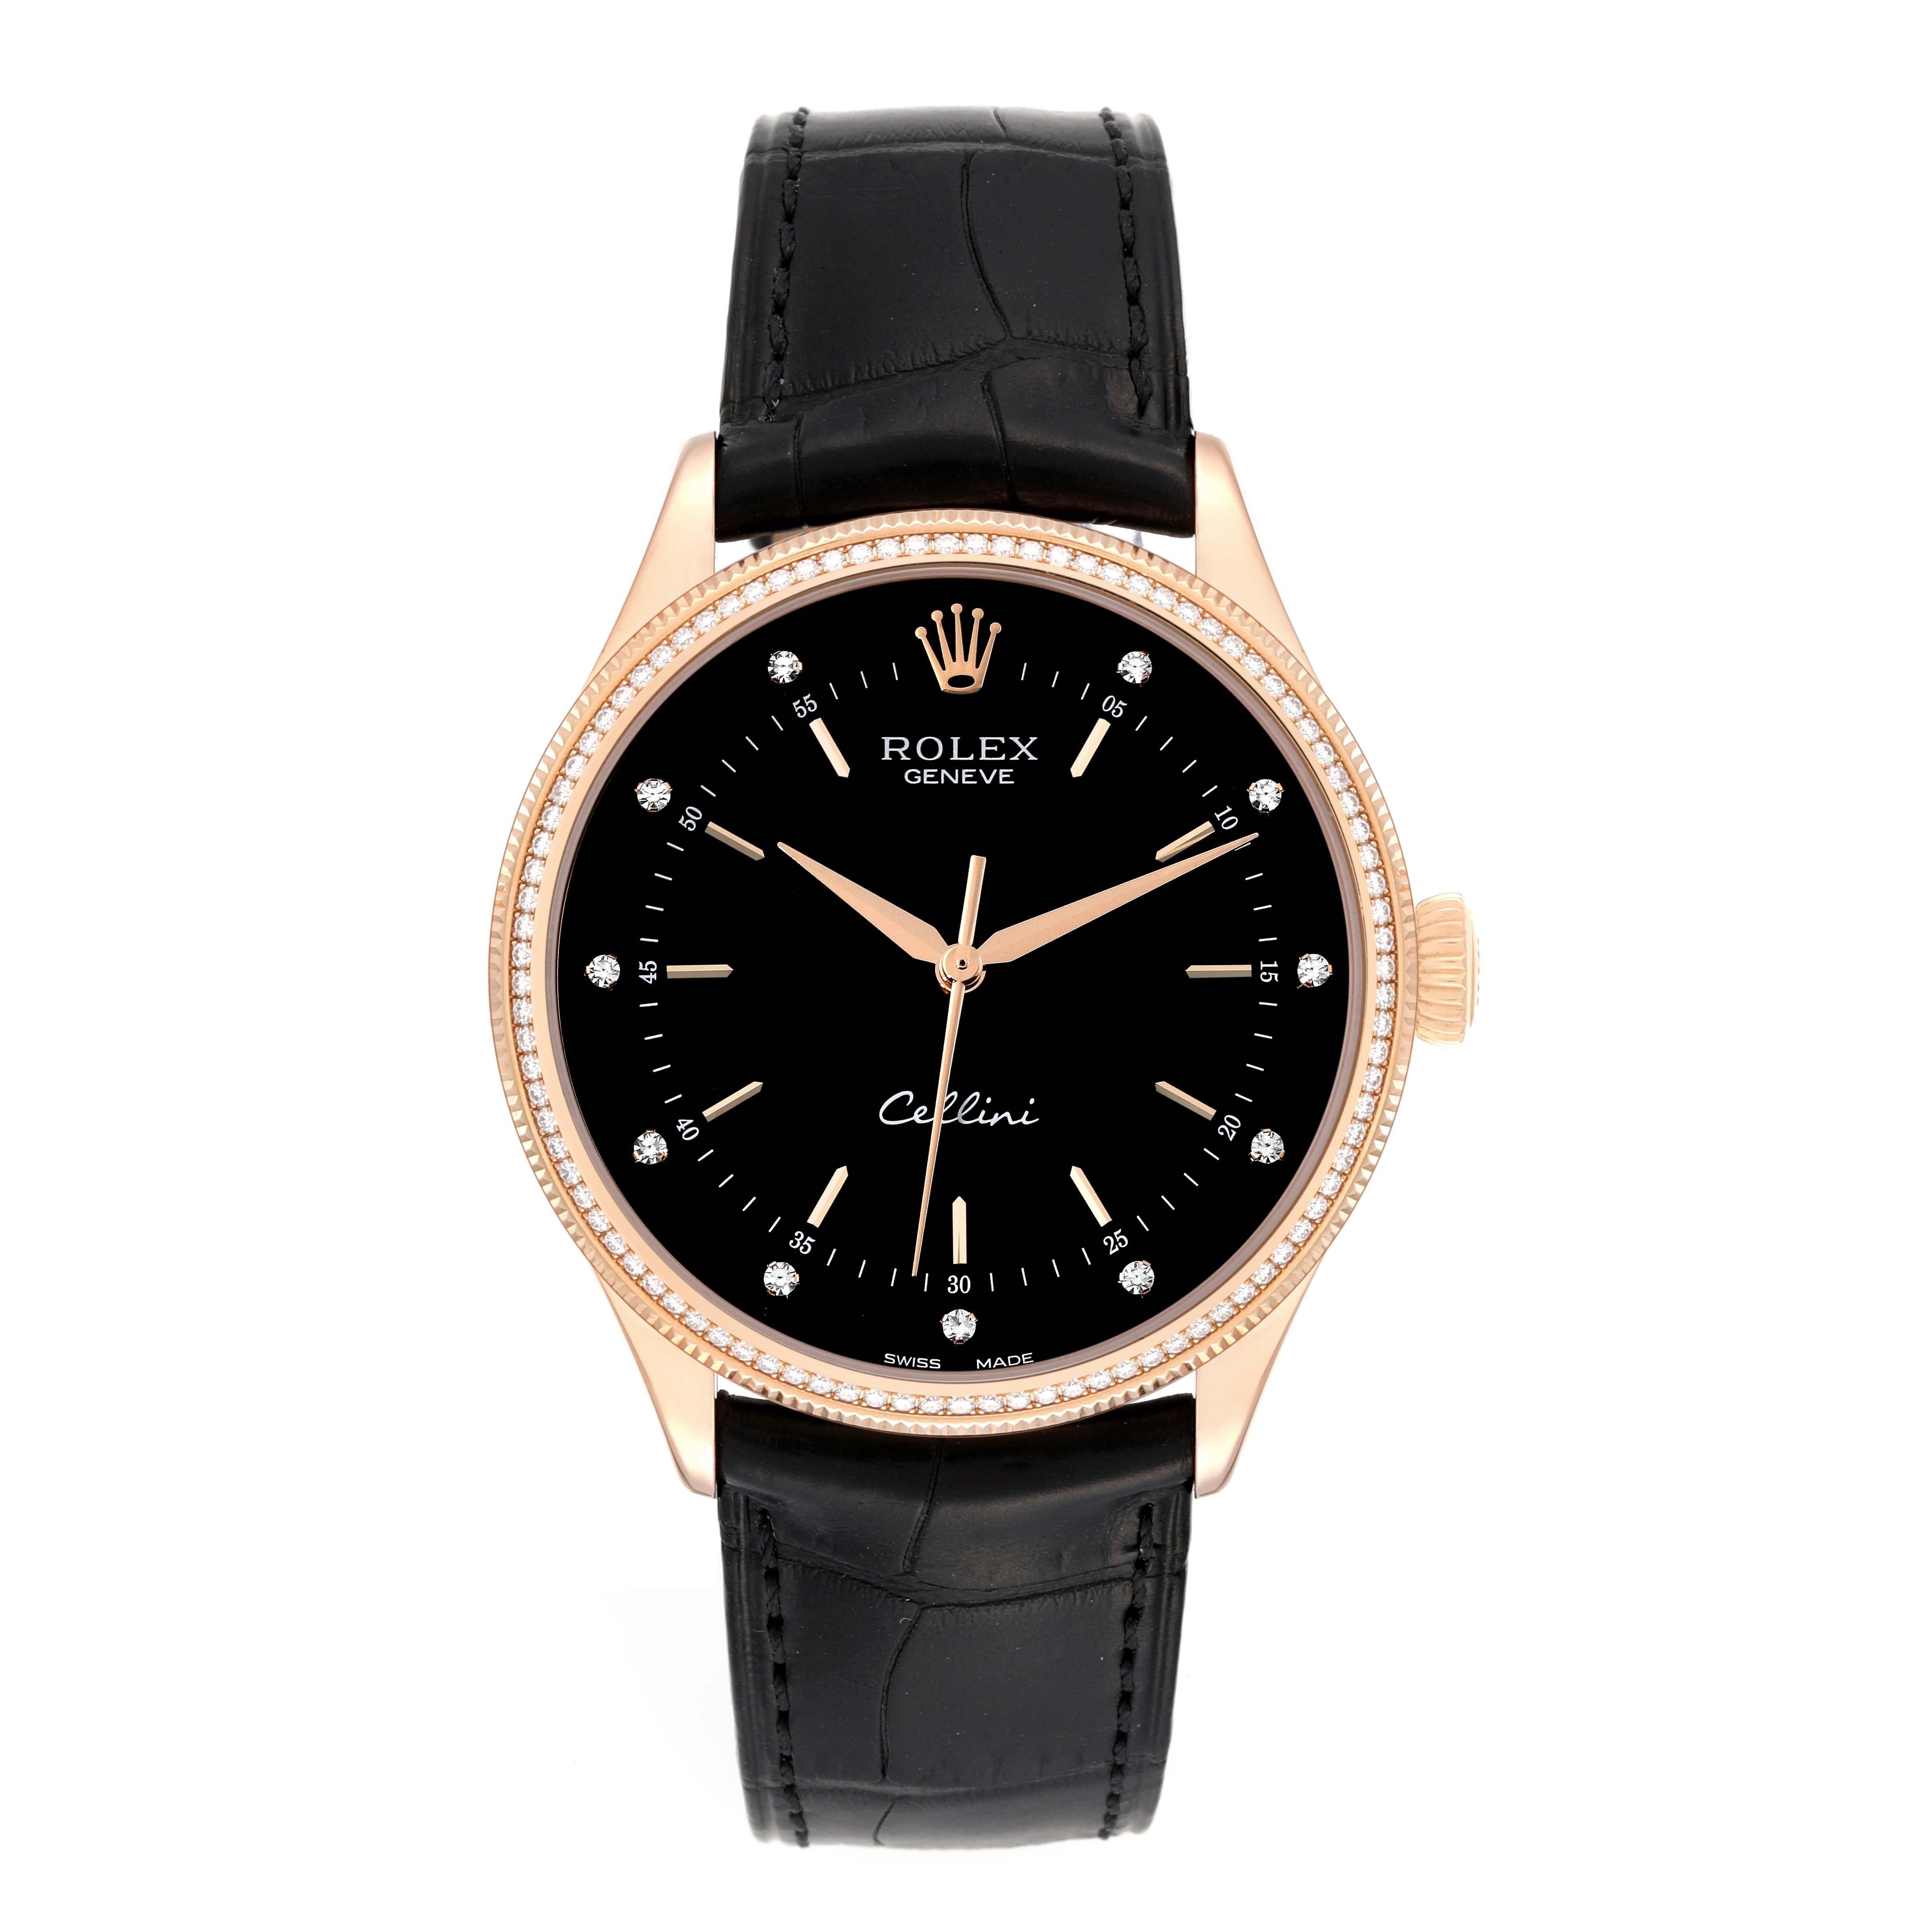 Rolex Cellini Time Rose Gold Black Dial Diamond Mens Watch 50605 Box Card. Automatic self-winding movement. Officially certified Swiss chronometer (COSC). Paramagnetic blue Parachrom hairspring. Bidirectional self-winding via Perpetual rotor. 18K